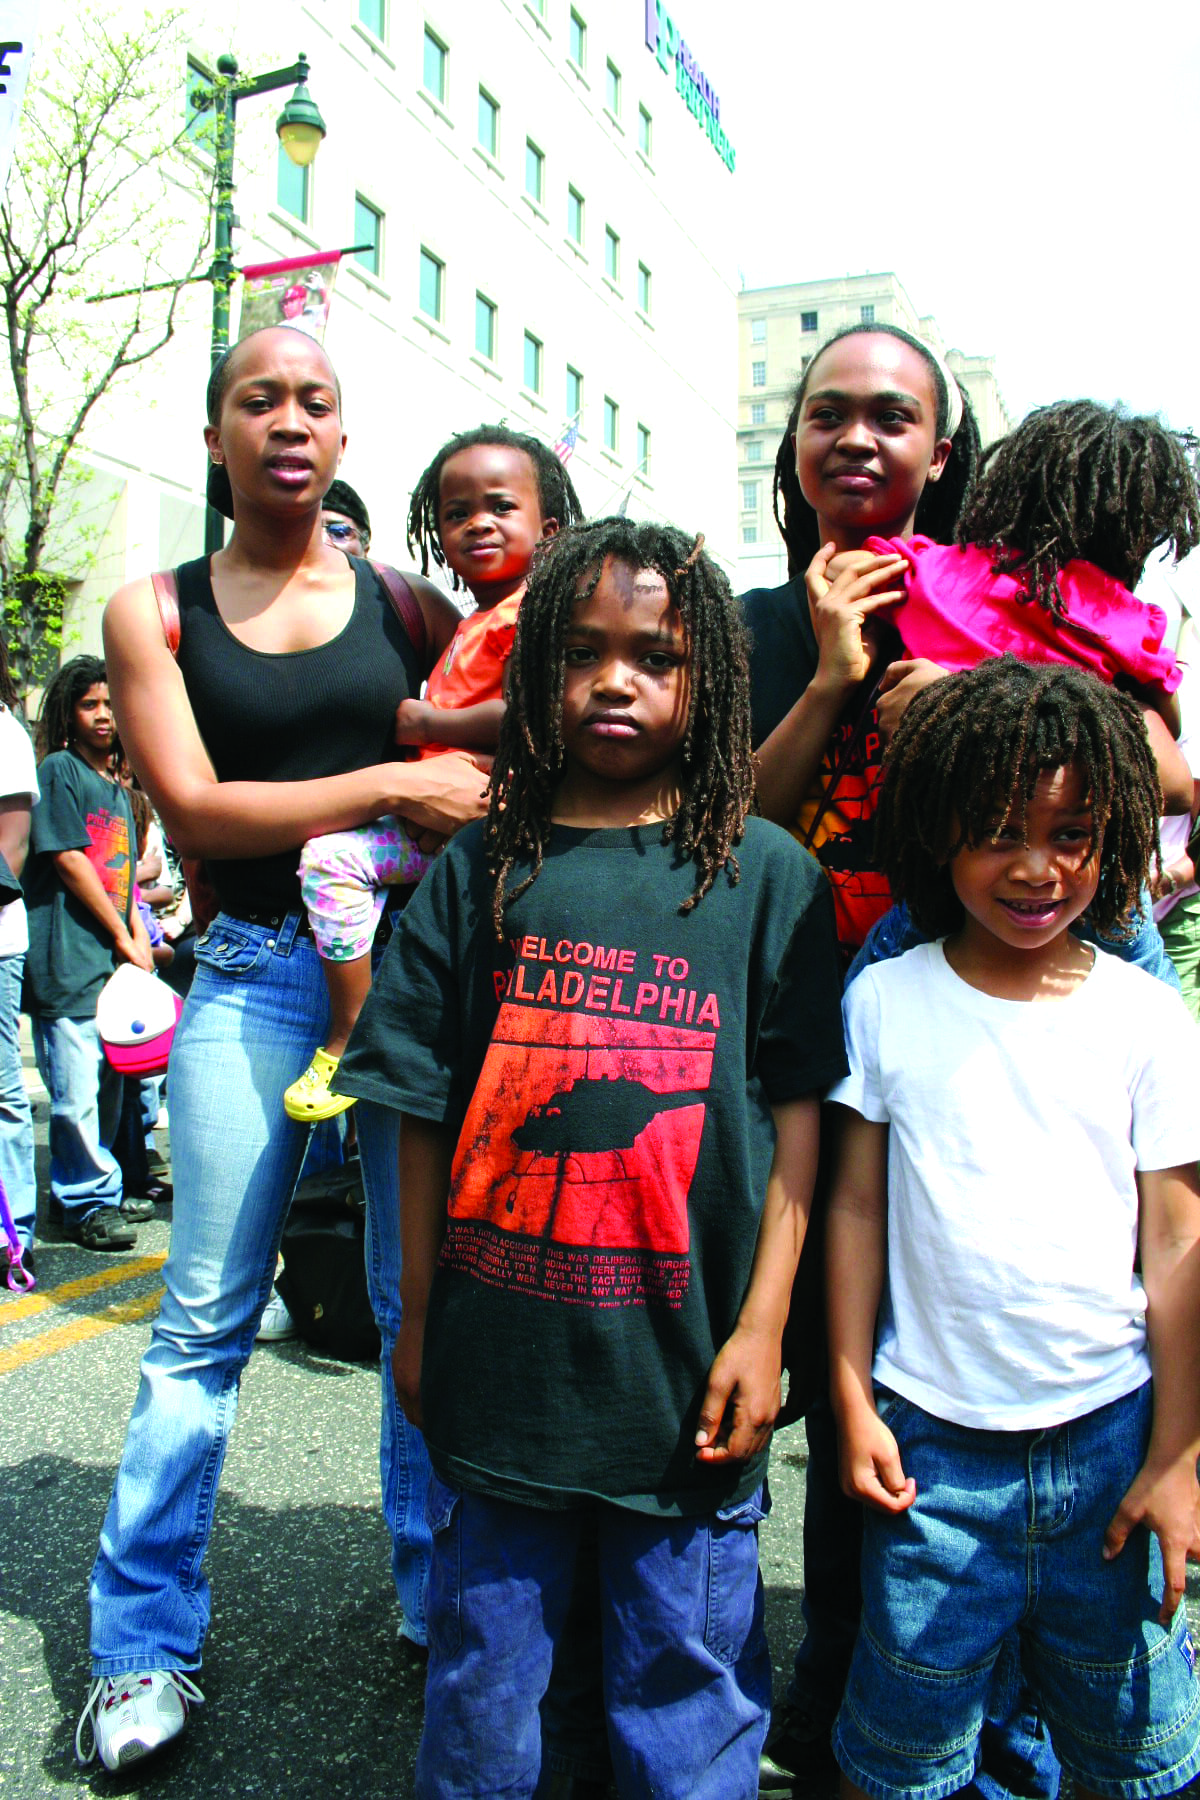 Pam’s-daughters-Pixie-Rose-Africa-MOVE-kids-for-Mumia-041908-by-JR, Support and defend the MOVE 9!, Archives 1976-2008 News & Views 